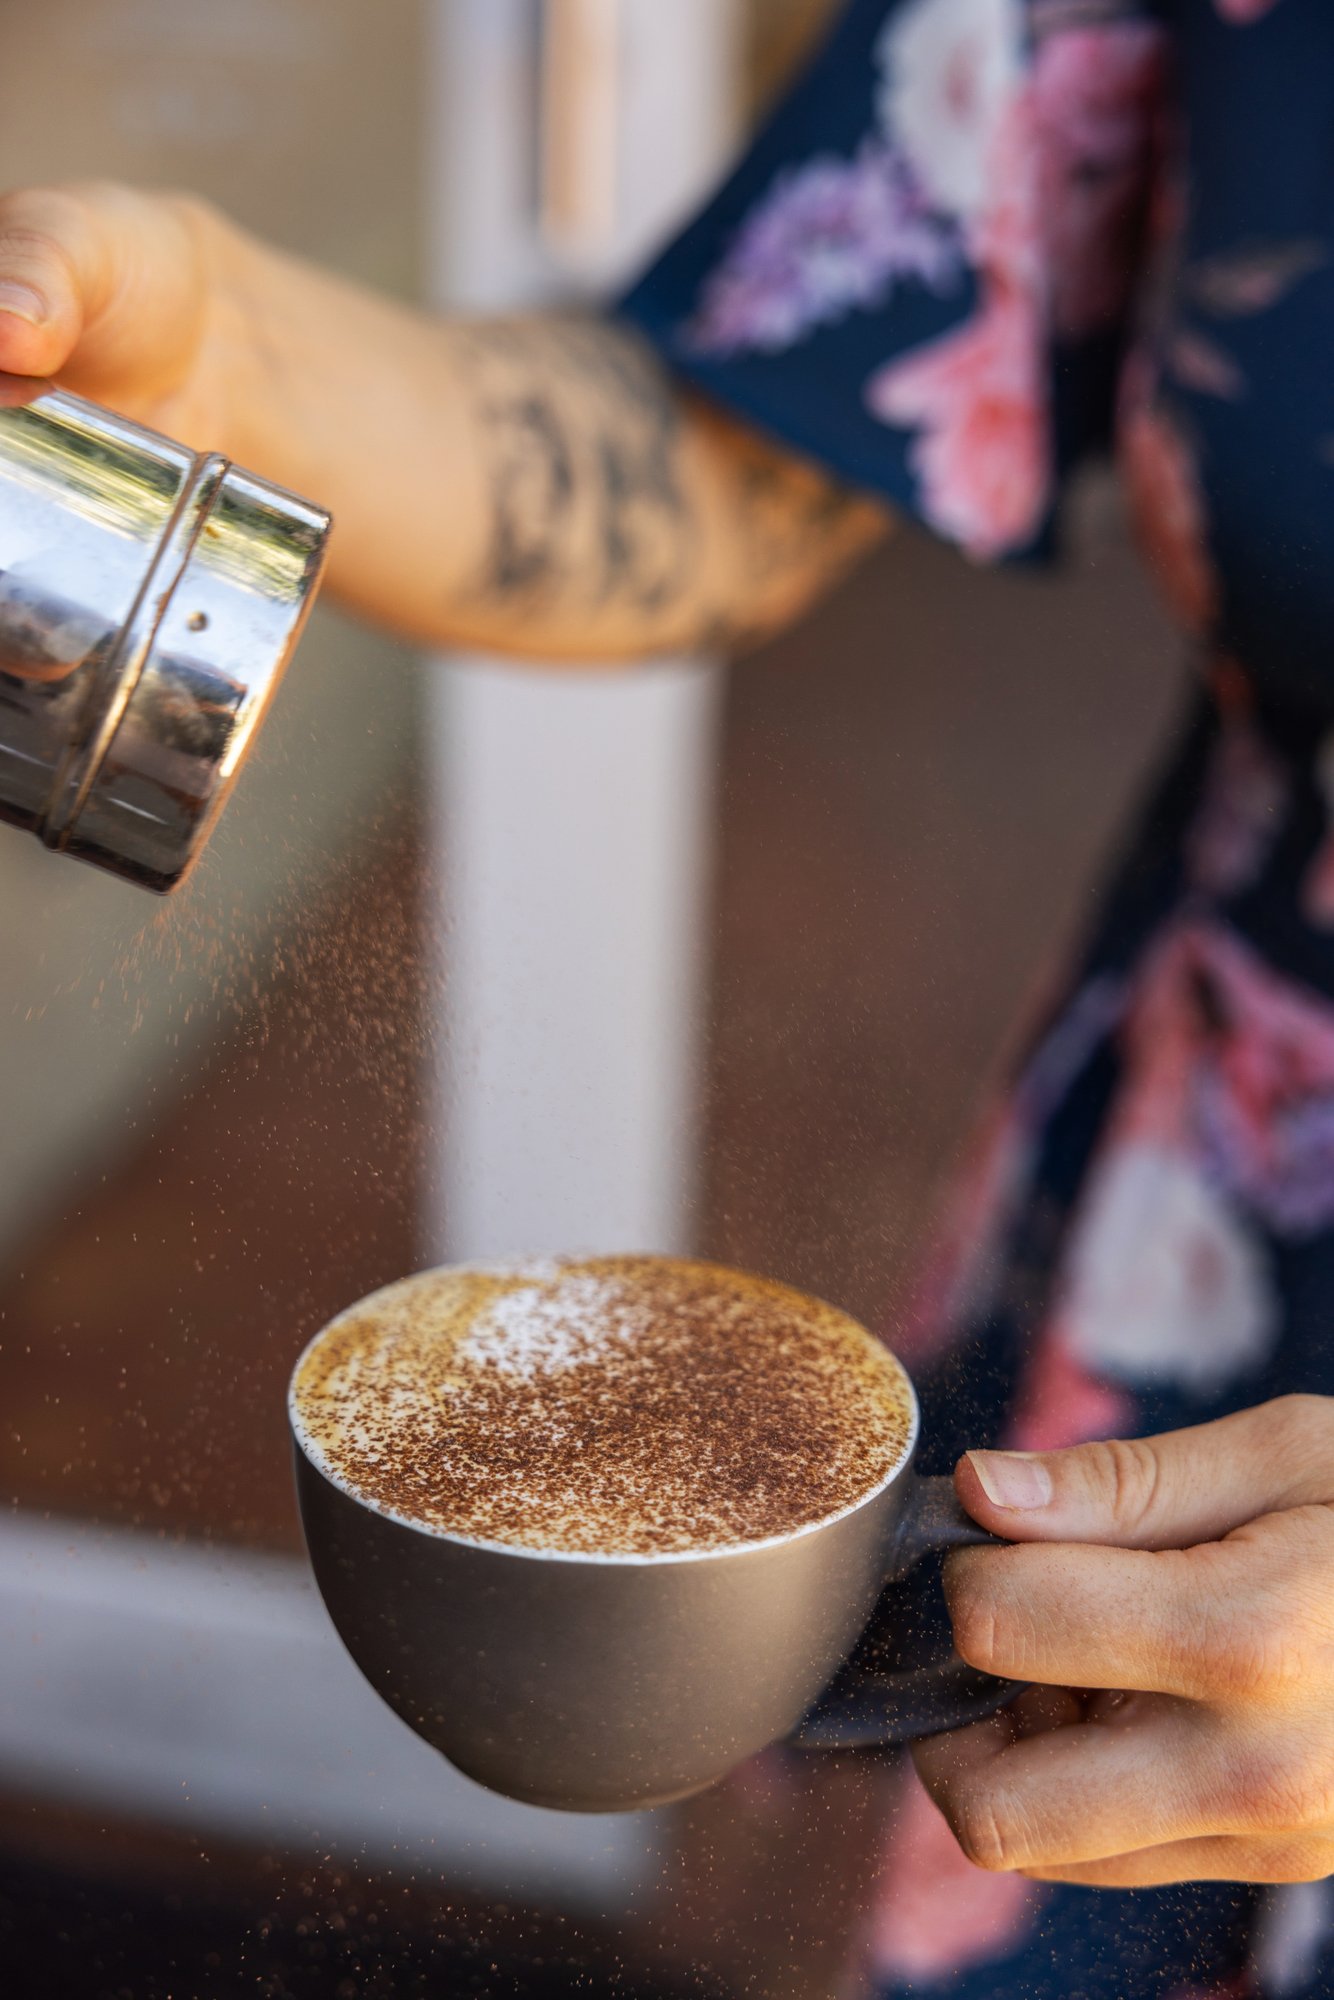 Whether you prefer your coffee bold and robust or silky smooth with a hint of sweetness, @bean_addiction have the perfect blend to kickstart your morning. From classic cappuccinos to magnificent mochas and everything in between, your ideal cuppa awai